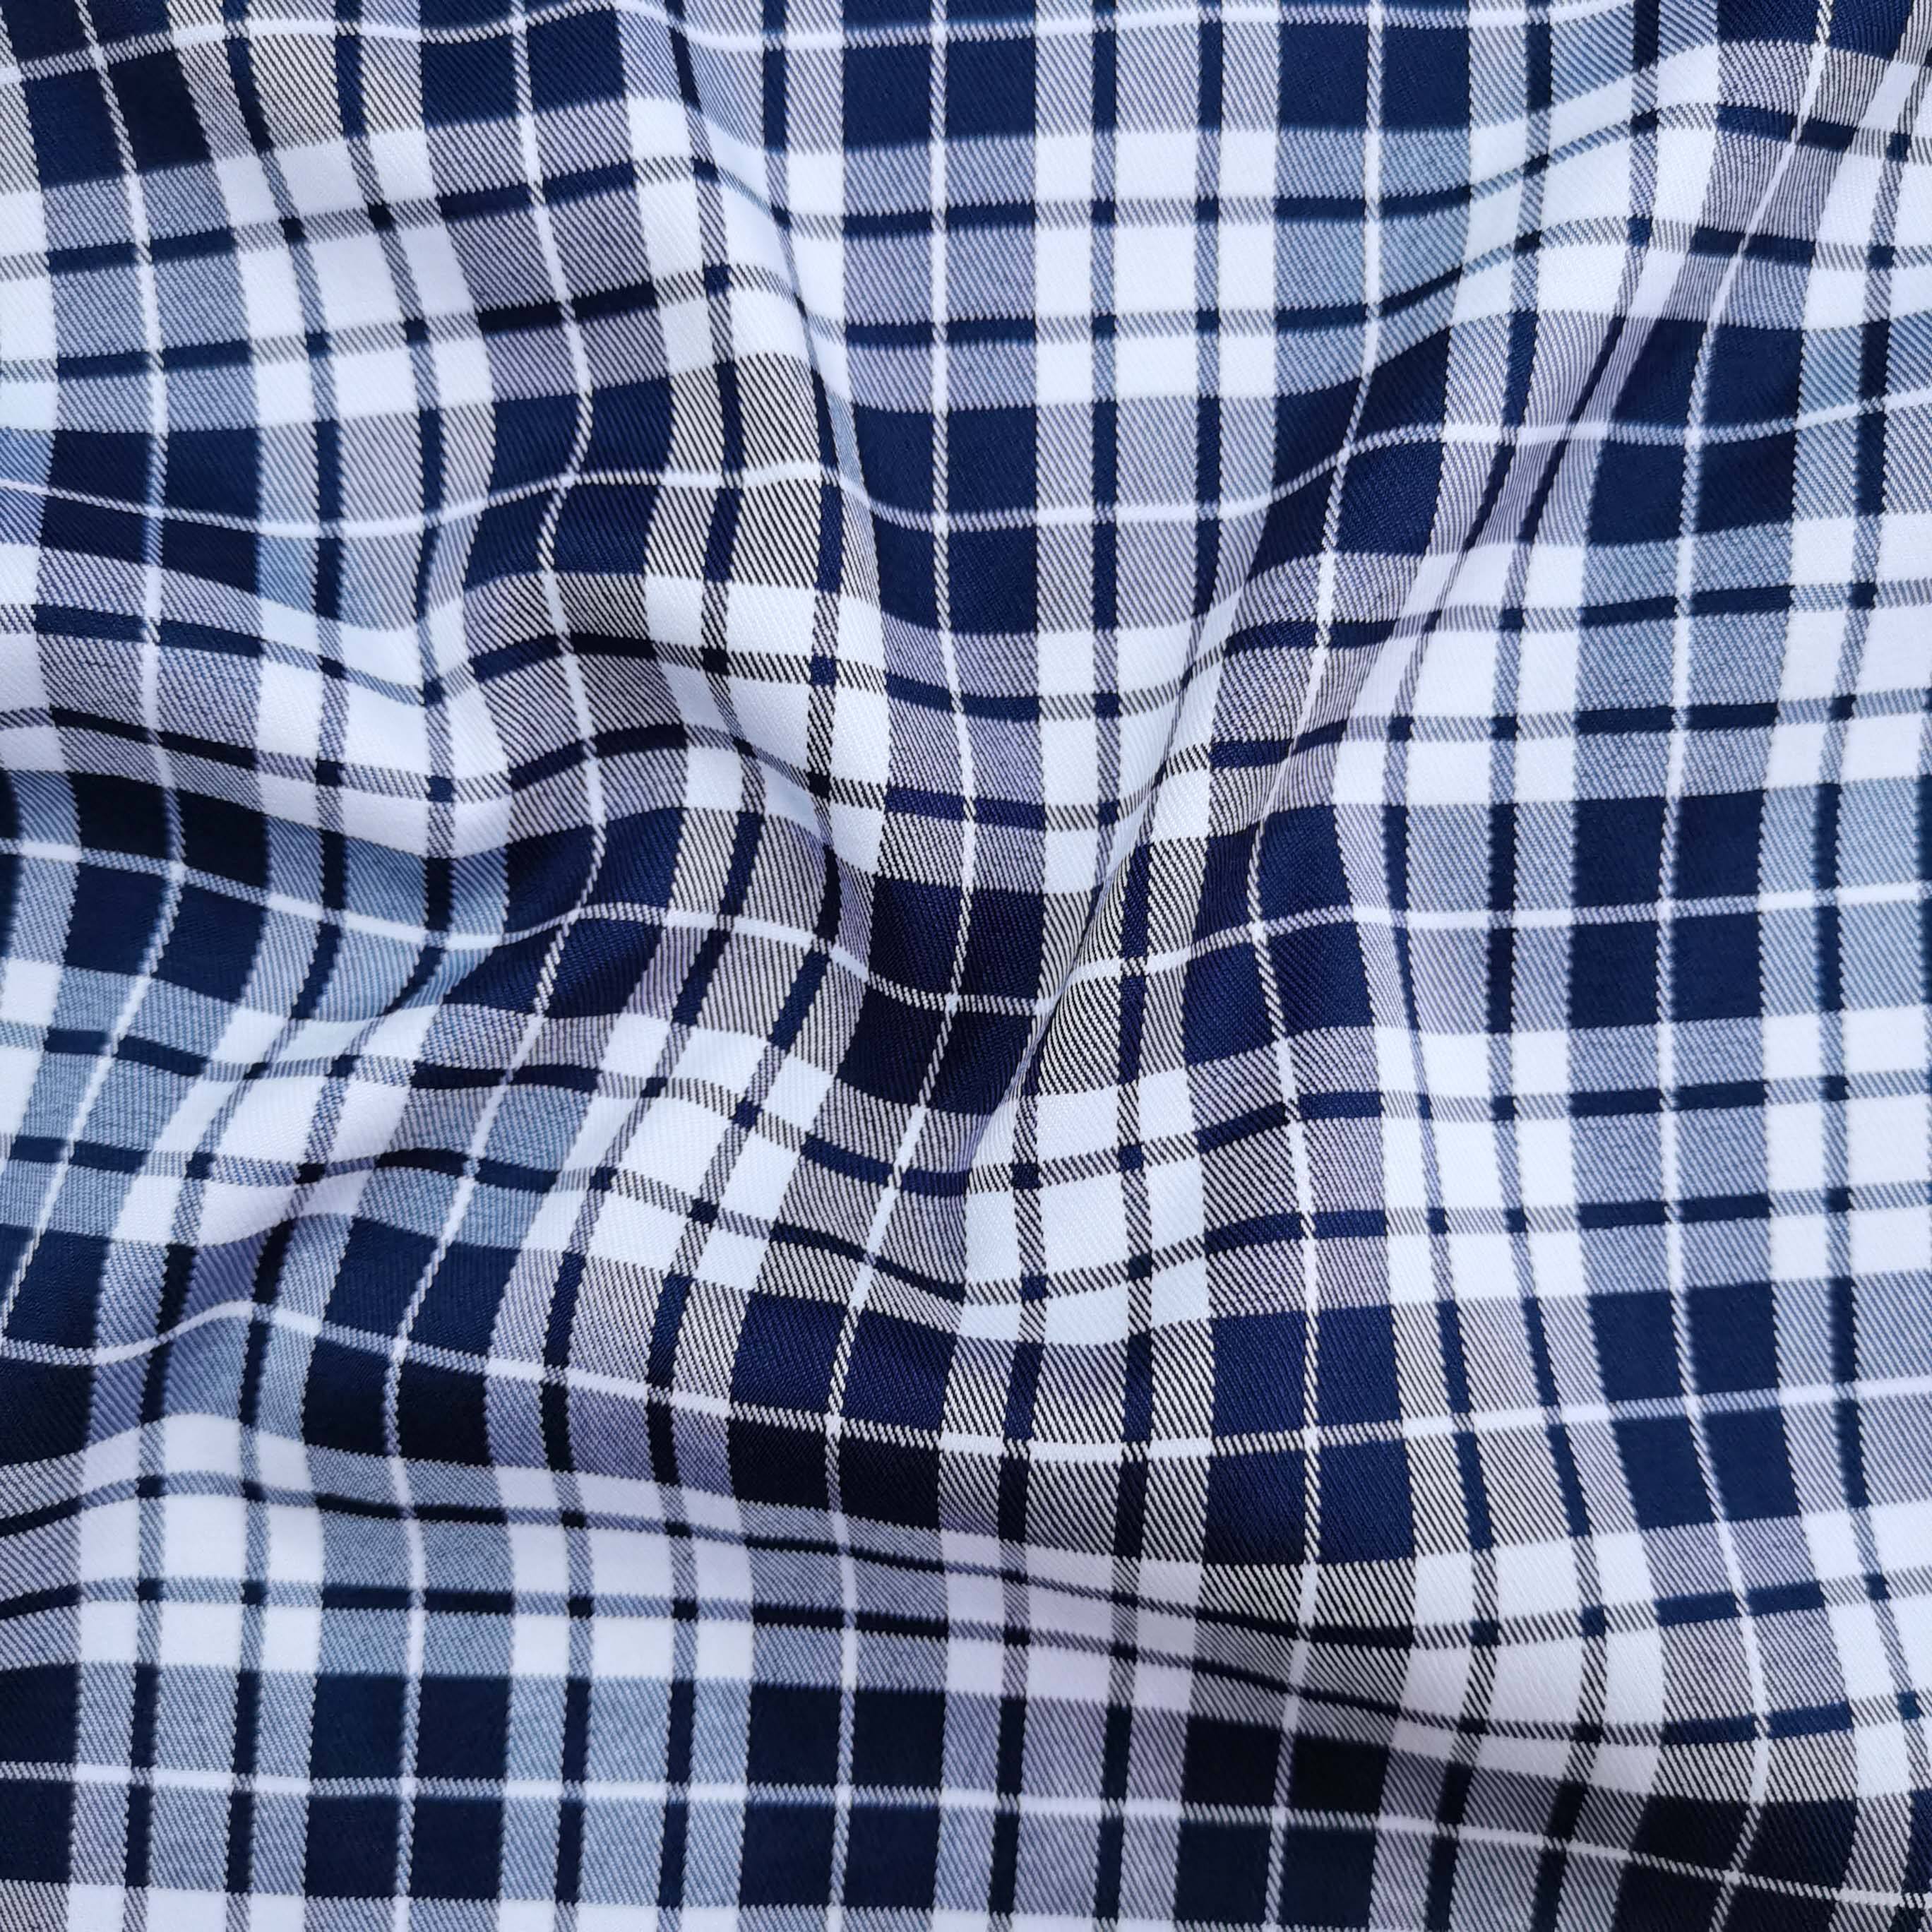 Top Quality 97% polyester 3% spandex yarn dyed check fabric